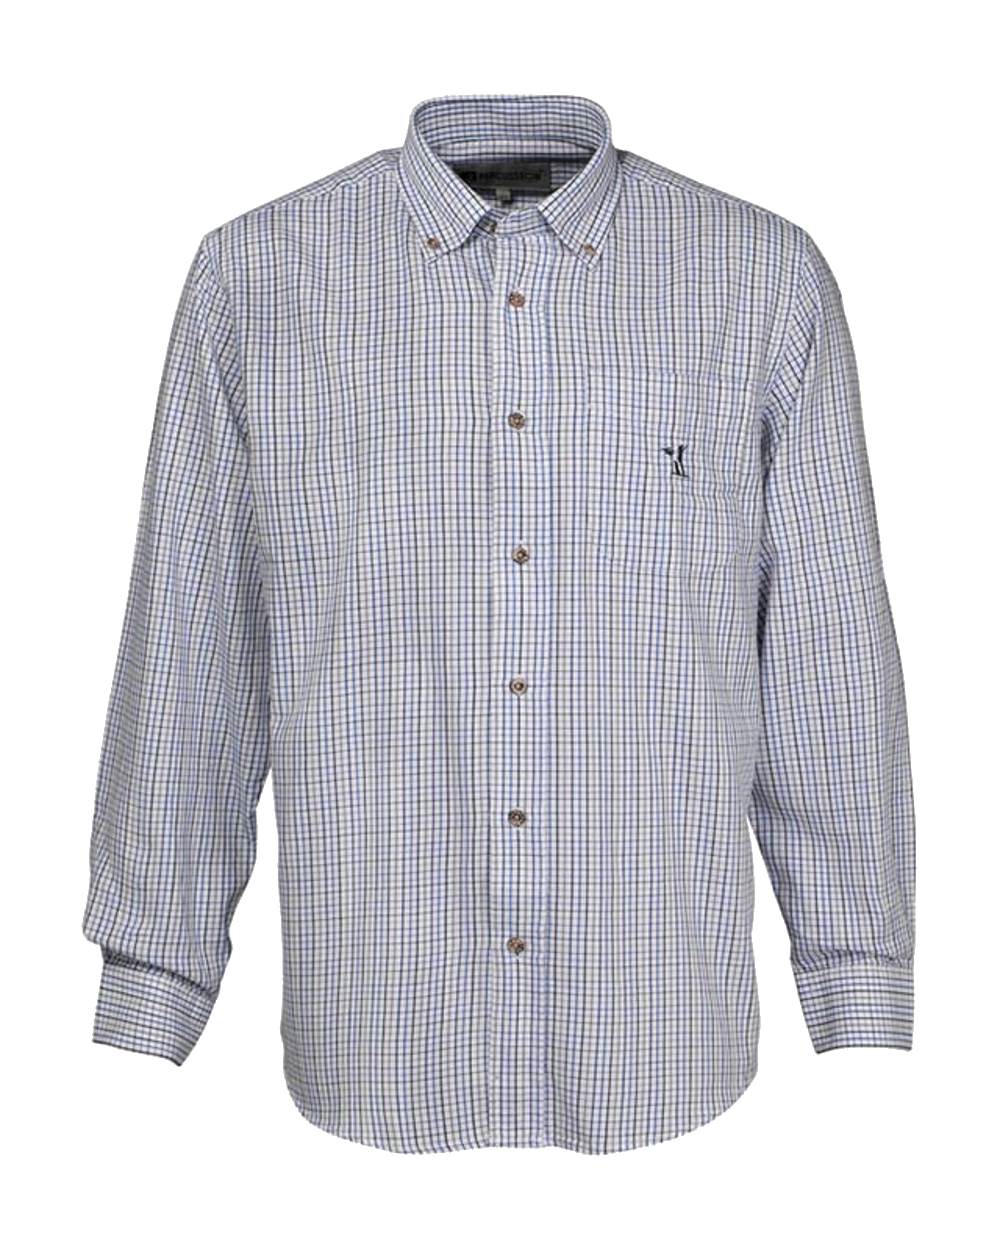 Percussion Small Check Shirt in Blue 